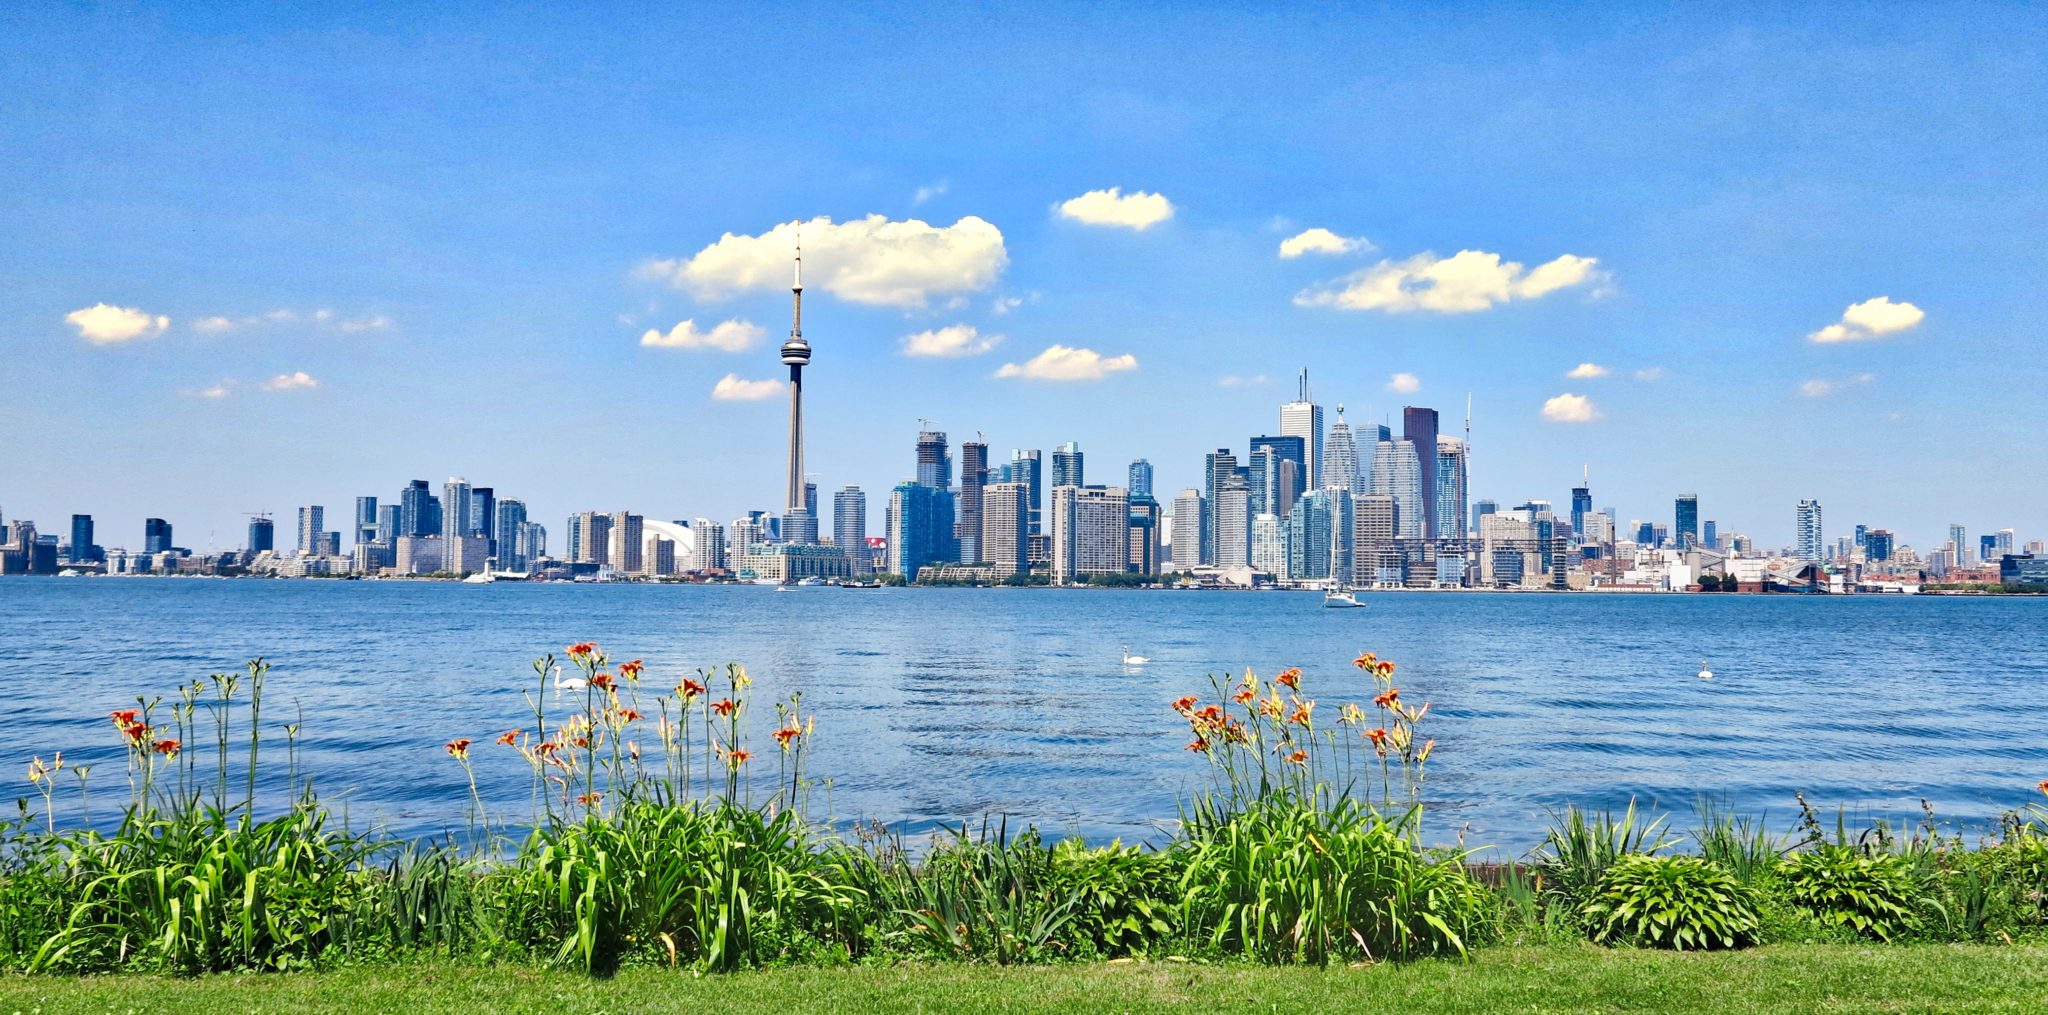 Toronto Waterfront, as we see it from Toronto Island.